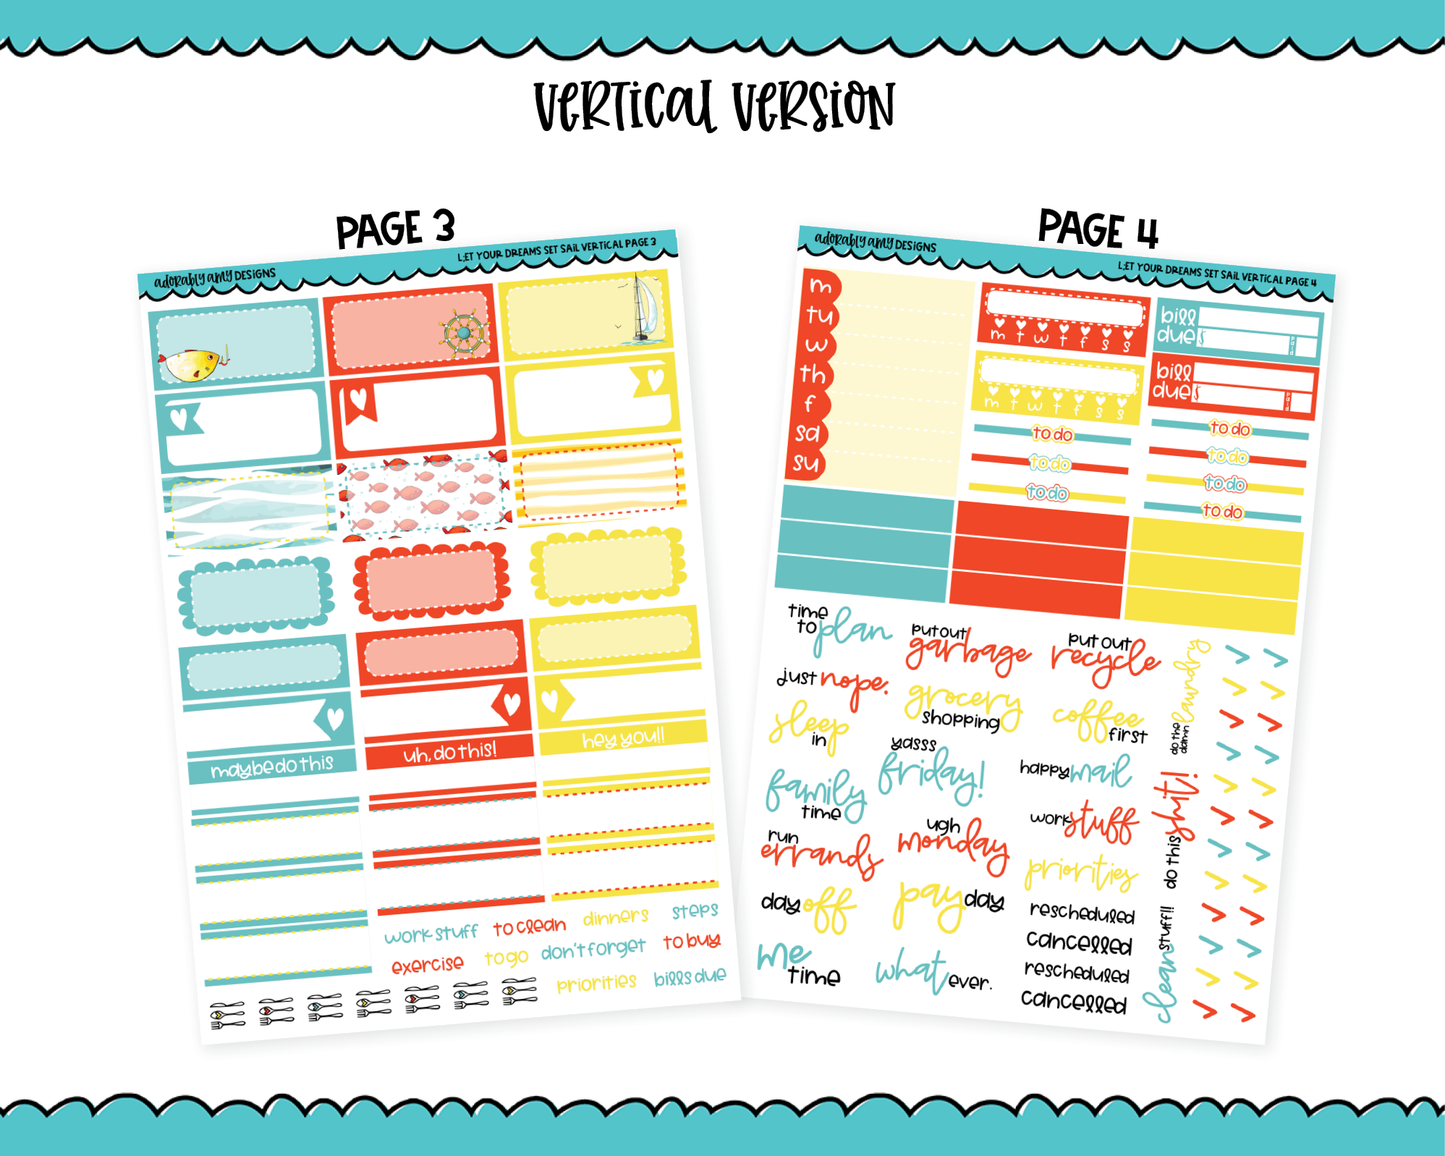 Vertical Let Your Dreams Set Sail Planner Sticker Kit for Vertical Standard Size Planners or Inserts